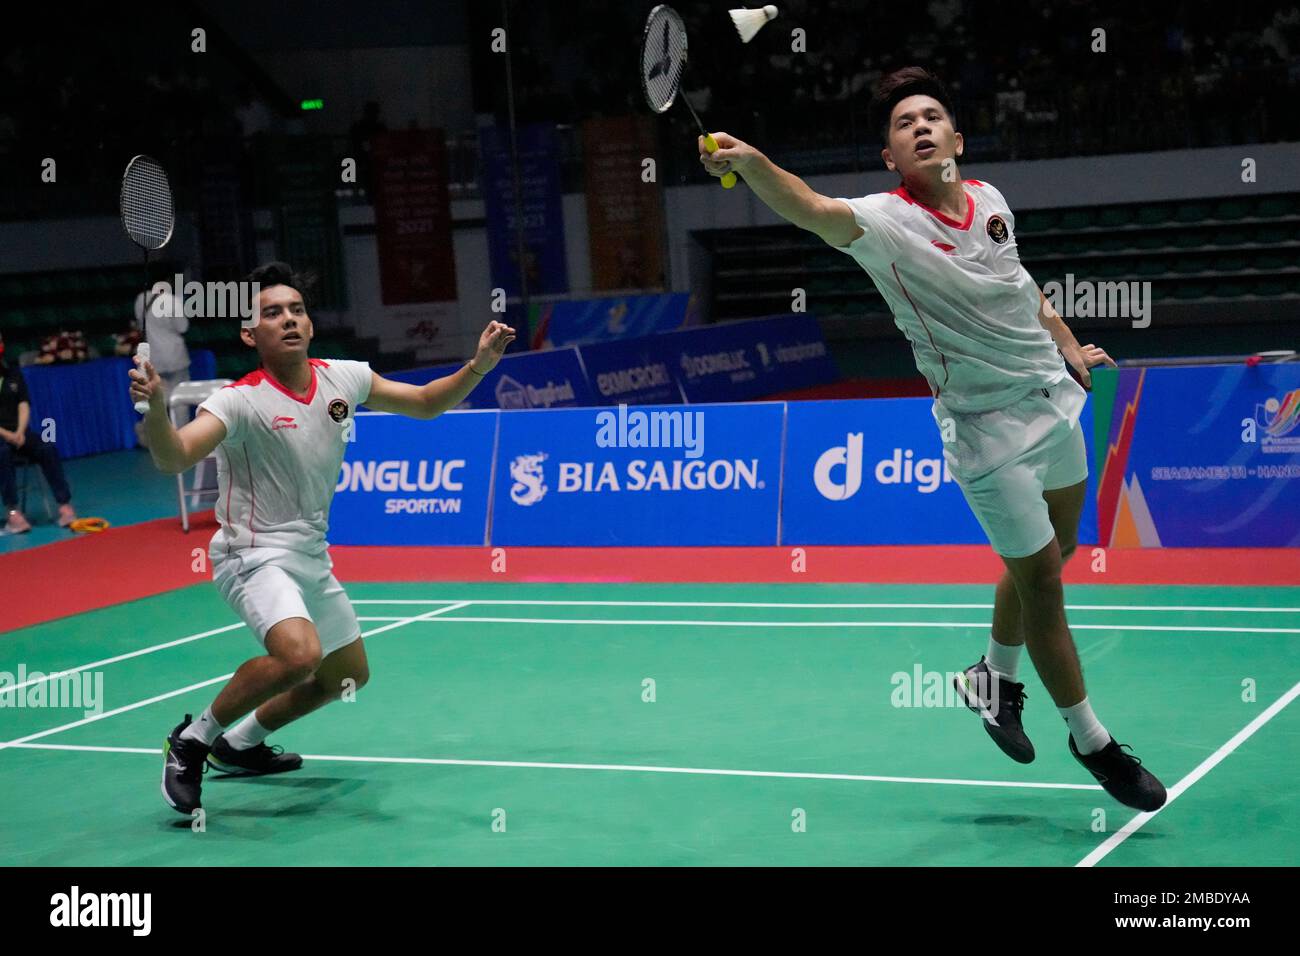 Indonesias Pramudya Kusumawardana, left, and Yeremia Rambitan compete against their compatriots Leo Rolly Carnando and Daniel Marthin during their mens doubles badminton final match at the 31st Southeast Asian Games (SEA Games)